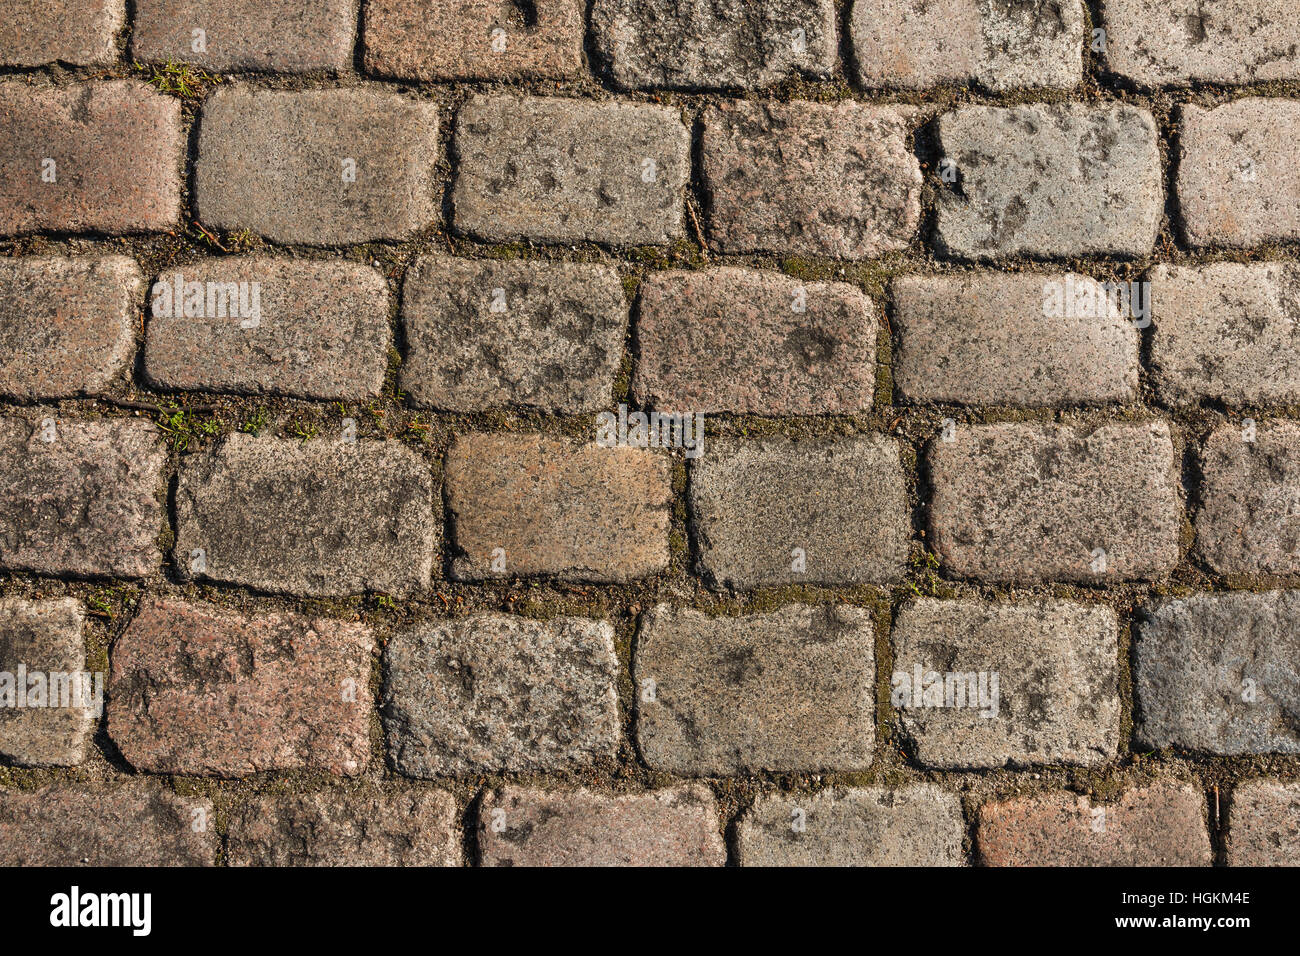 Old cobbled street in Europe. Usable as pattern or background. Stock Photo